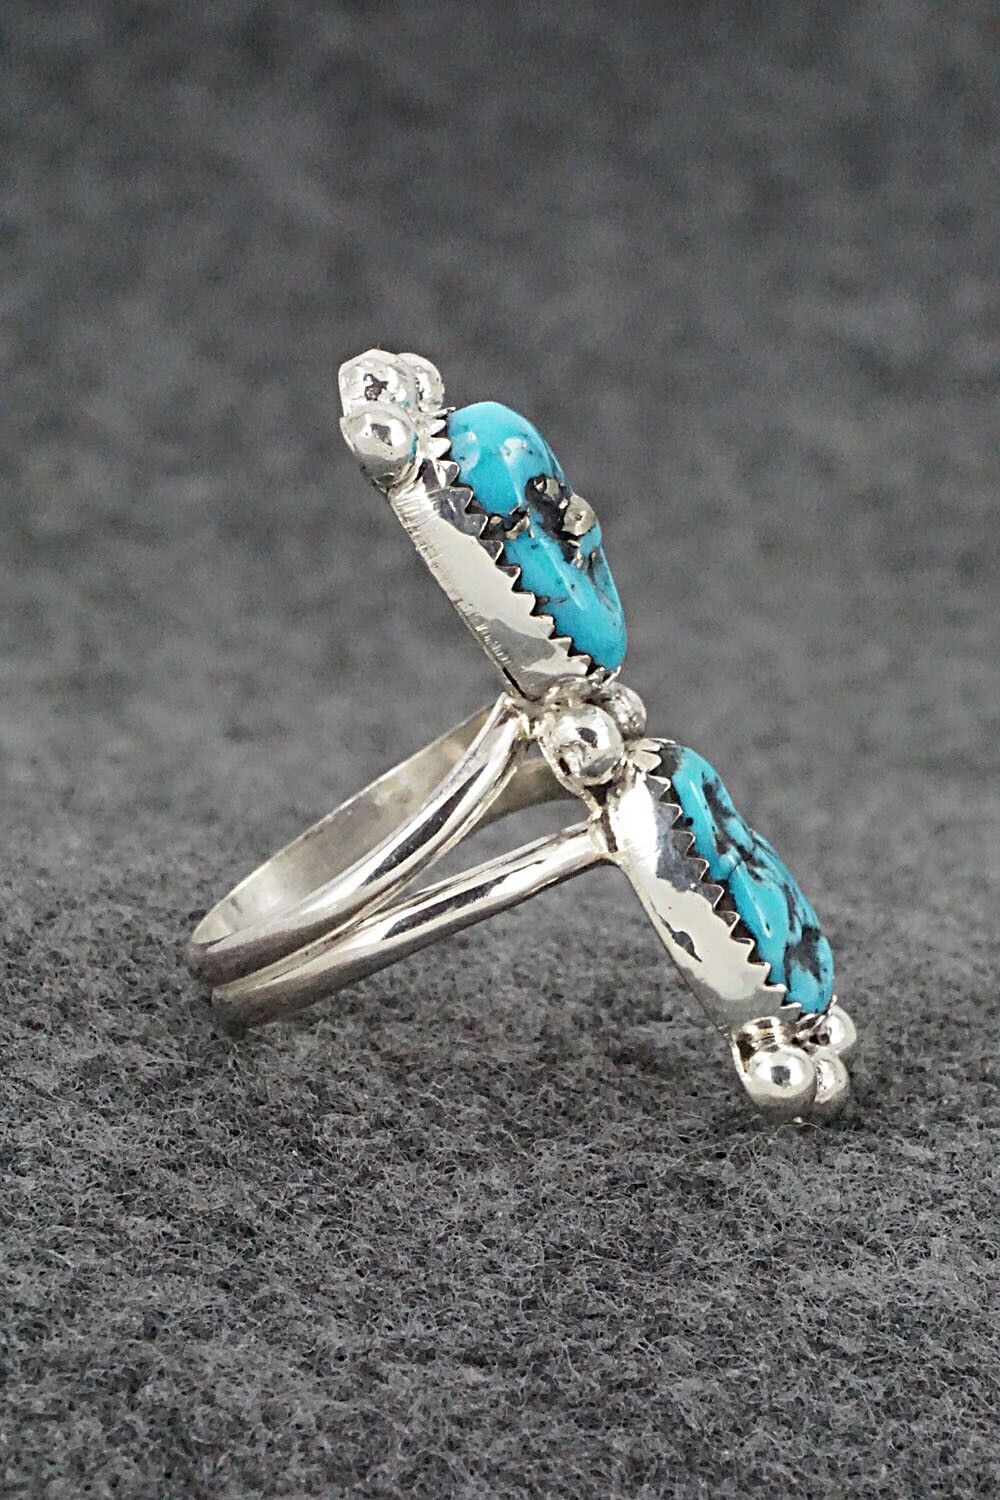 Turquoise & Sterling Silver Ring - Jeff Lucio - Size 7